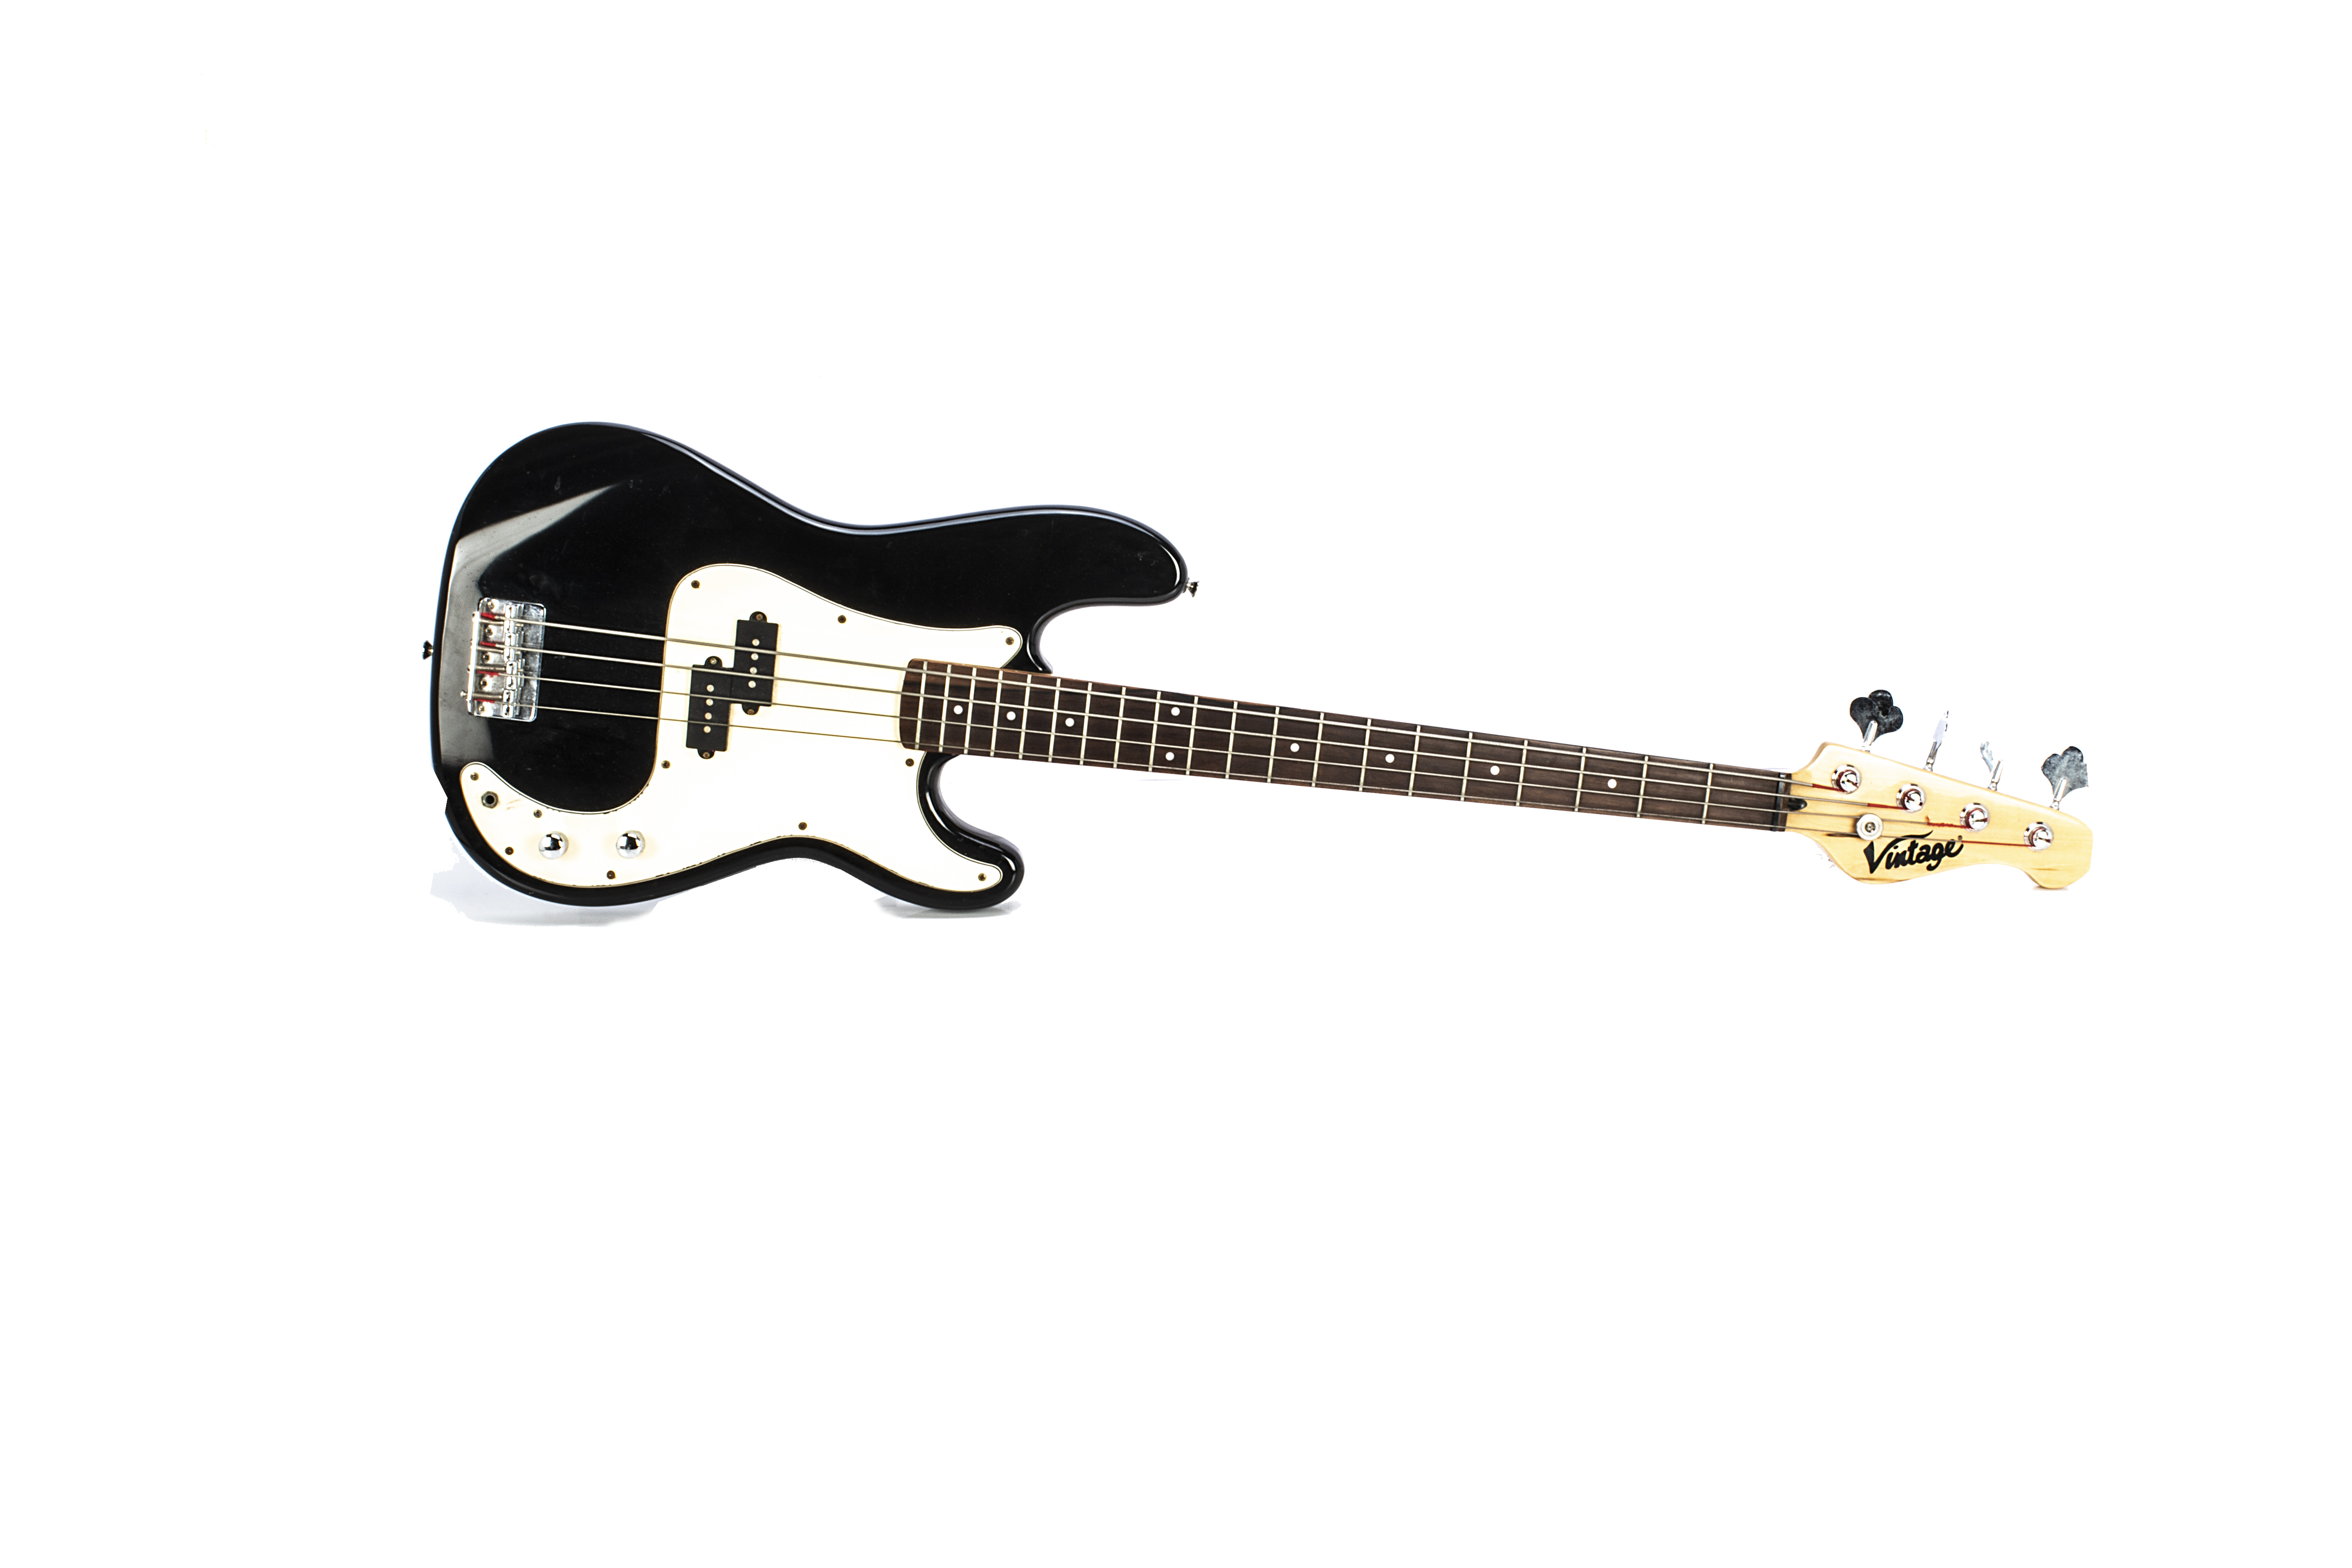 Vintage Bass Guitar, a Vintage Bass Guitar black with white pick guard, some light wear but